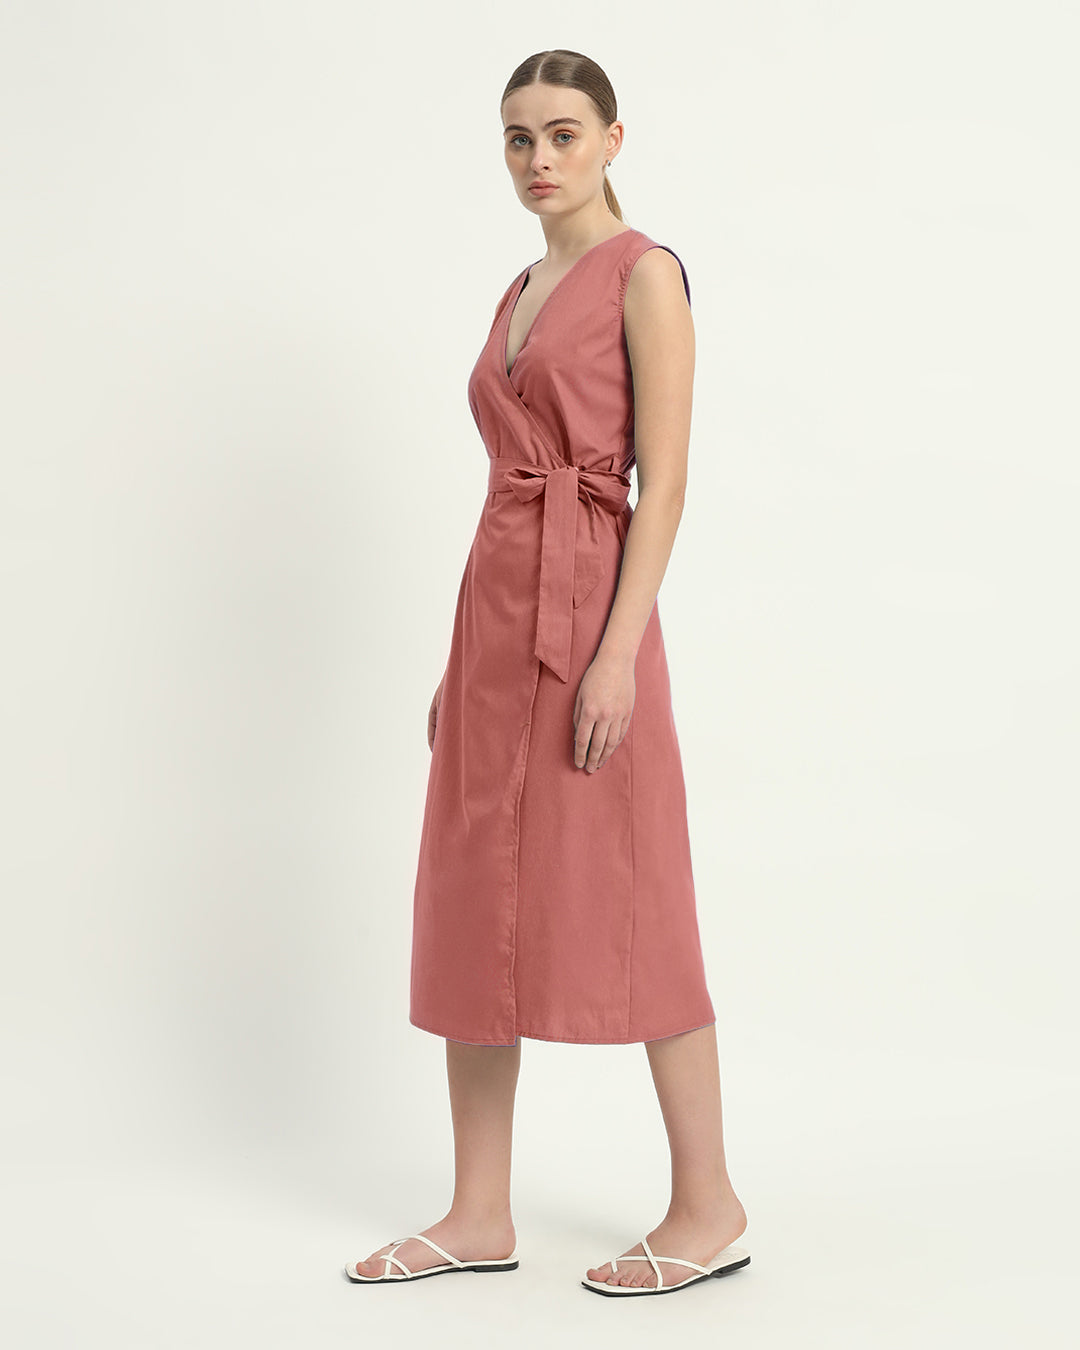 The Ivory Pink Windsor Cotton Dress